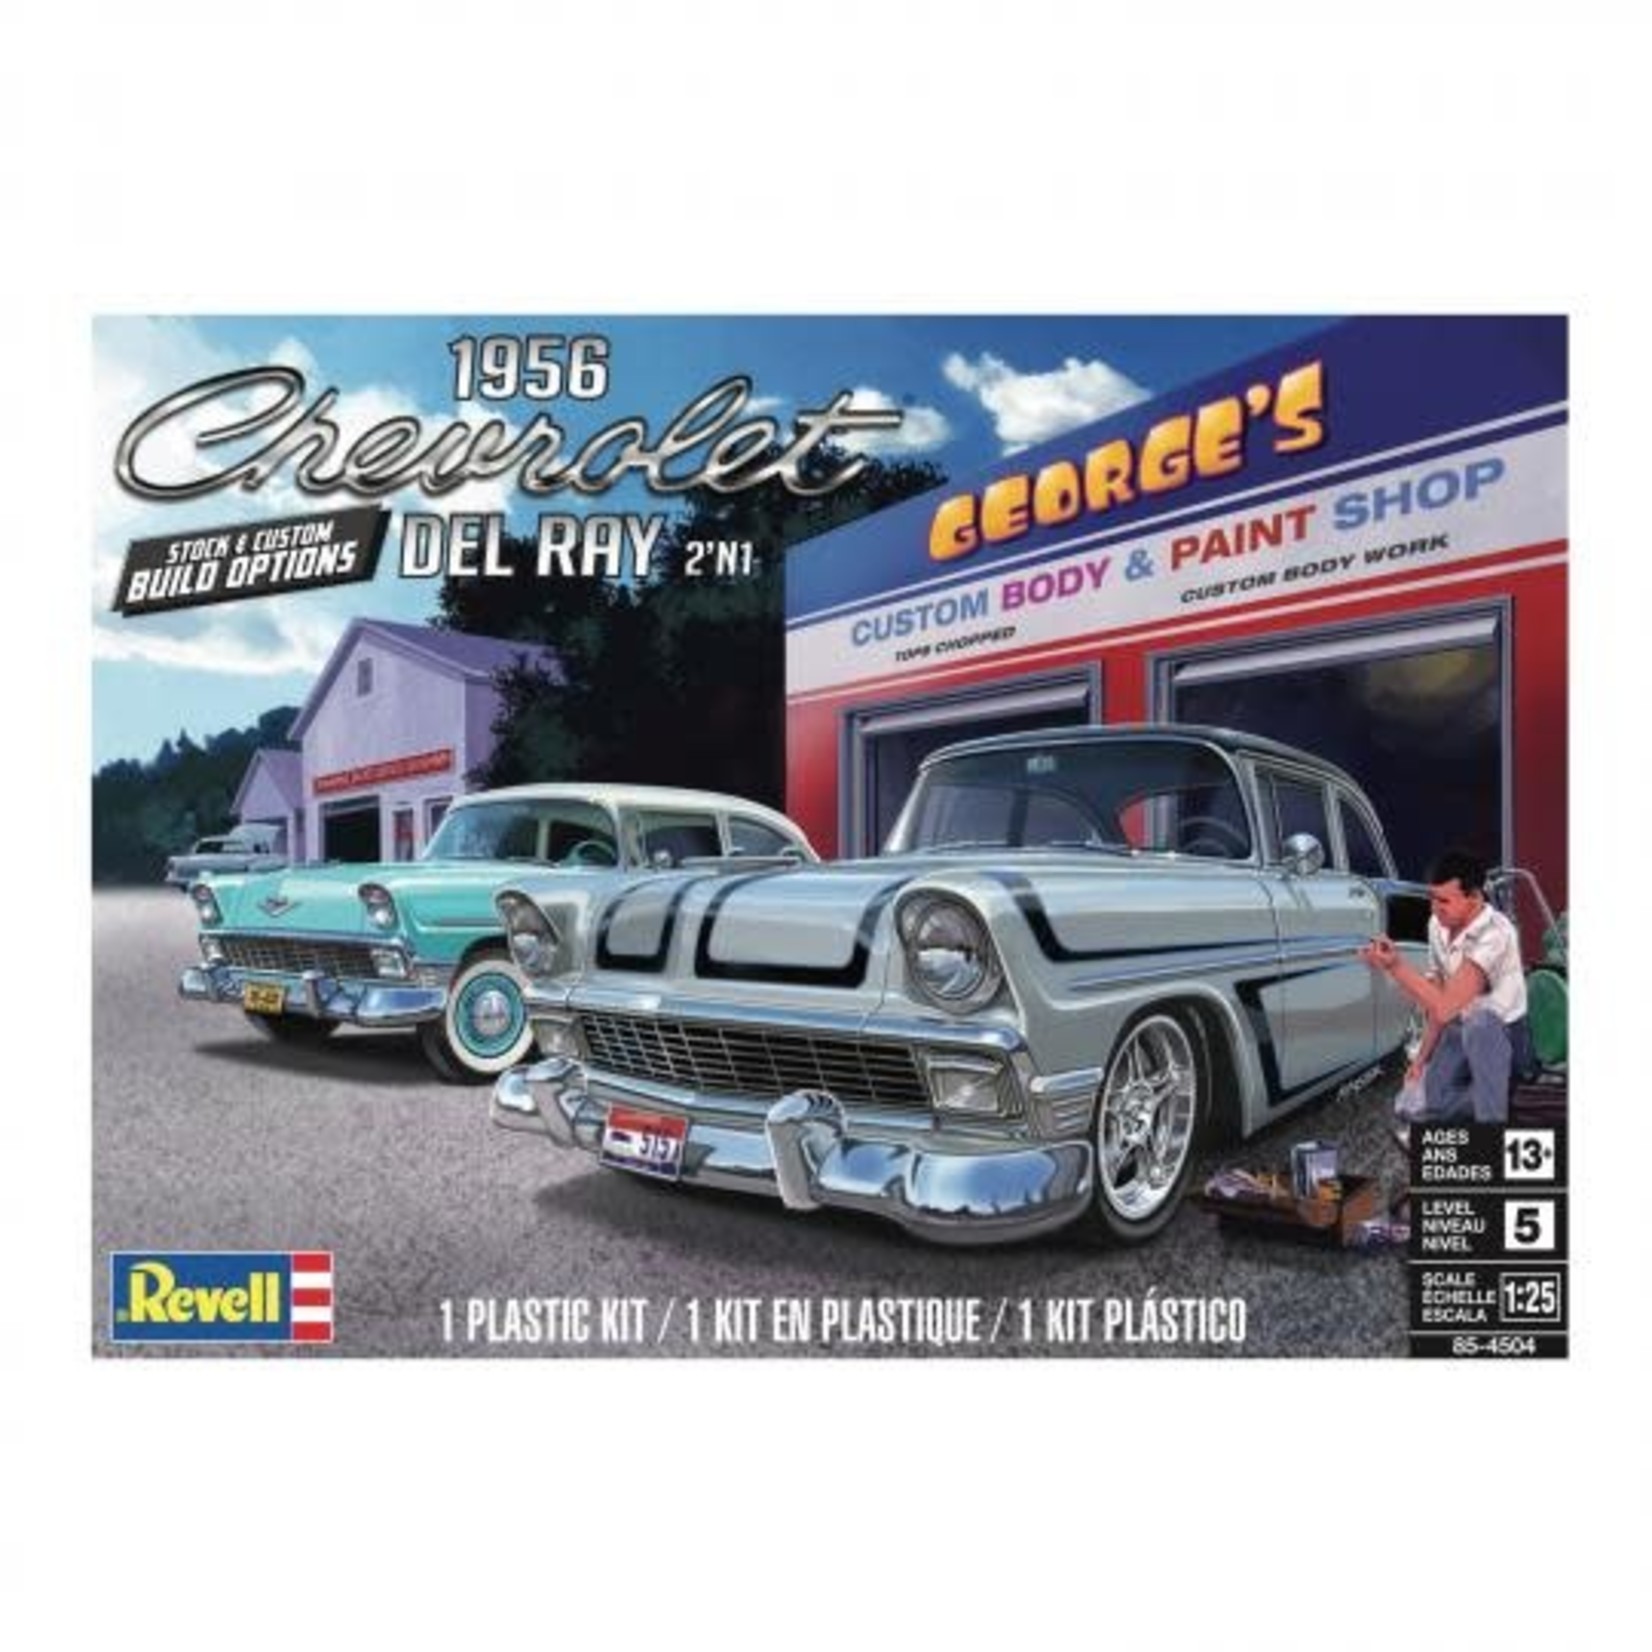 Revell 1/25 56 Chevy Del Ray 2n1 Kit